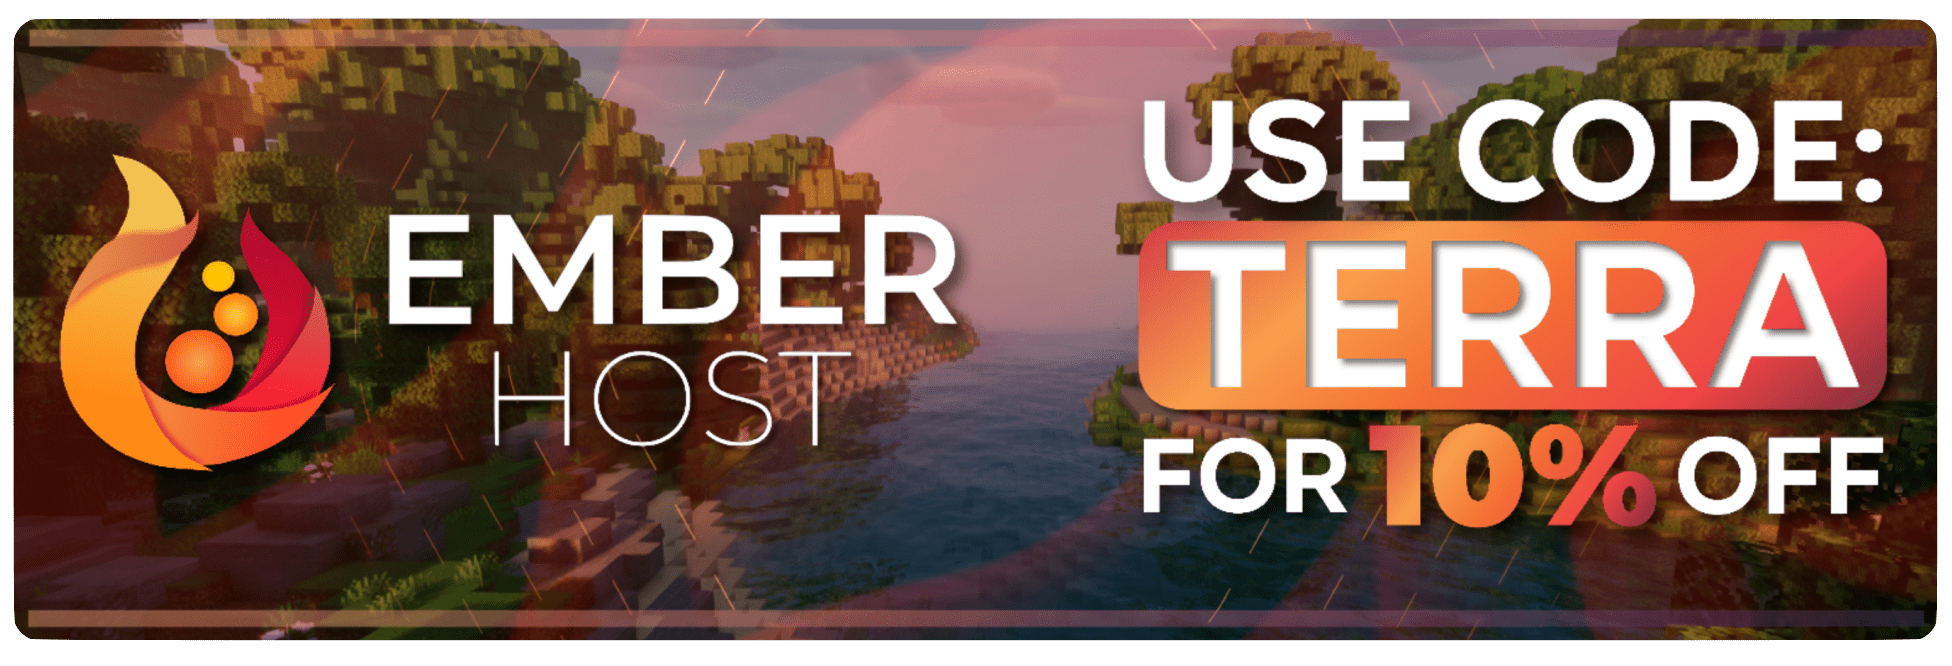 Image Says: "Ember Host Use Code: Terra For 10% Off"